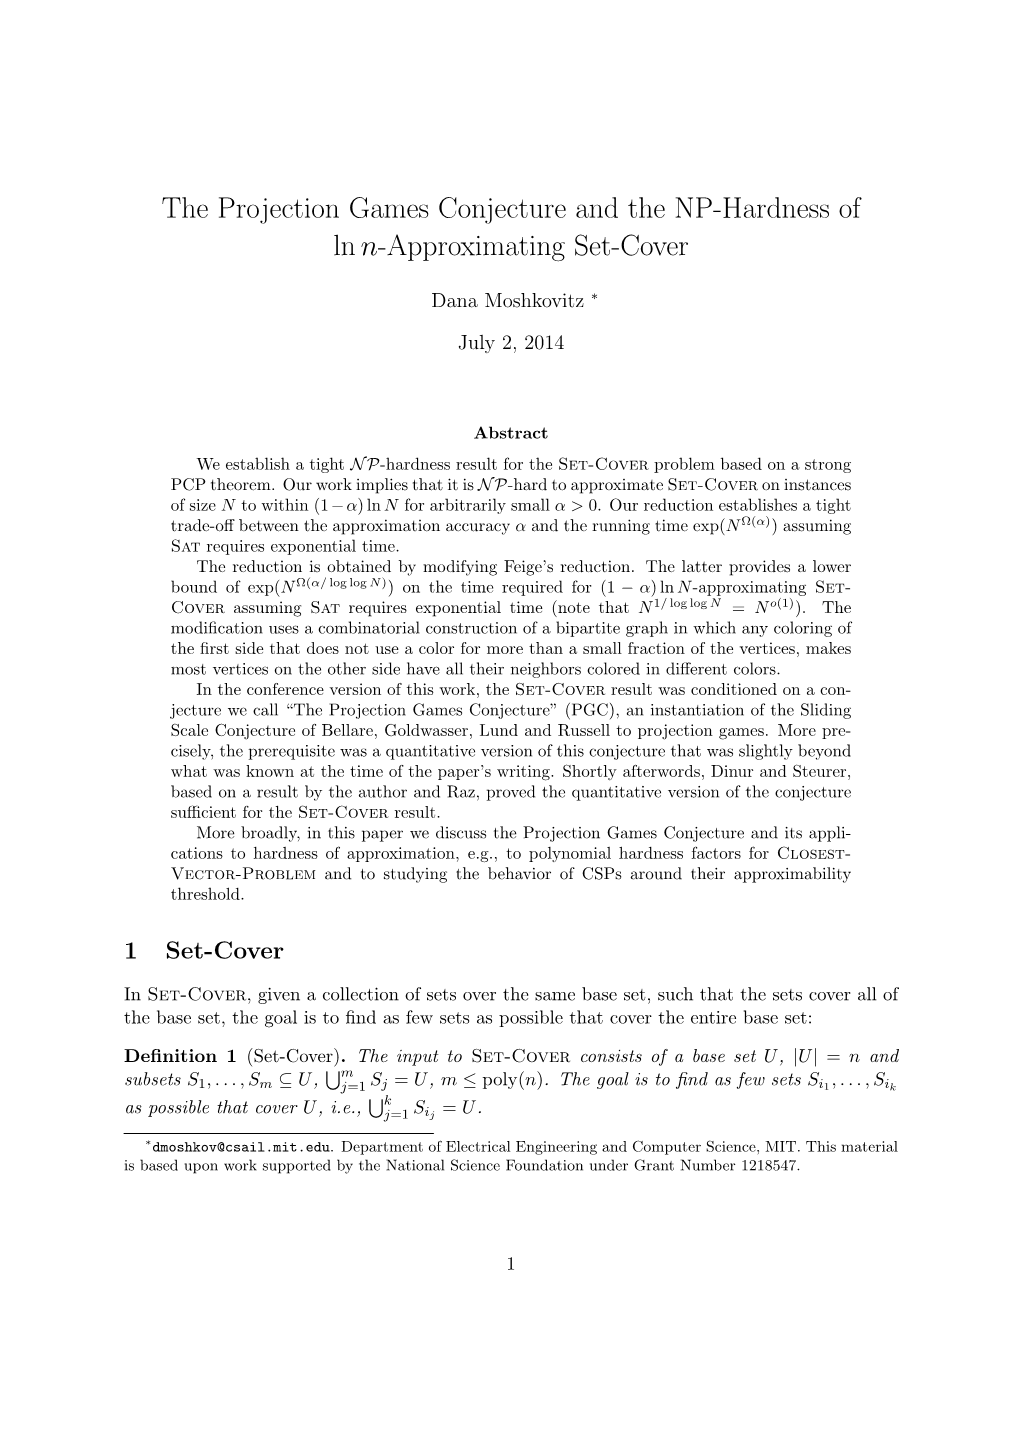 The Projection Games Conjecture and the NP-Hardness of Ln N-Approximating Set-Cover